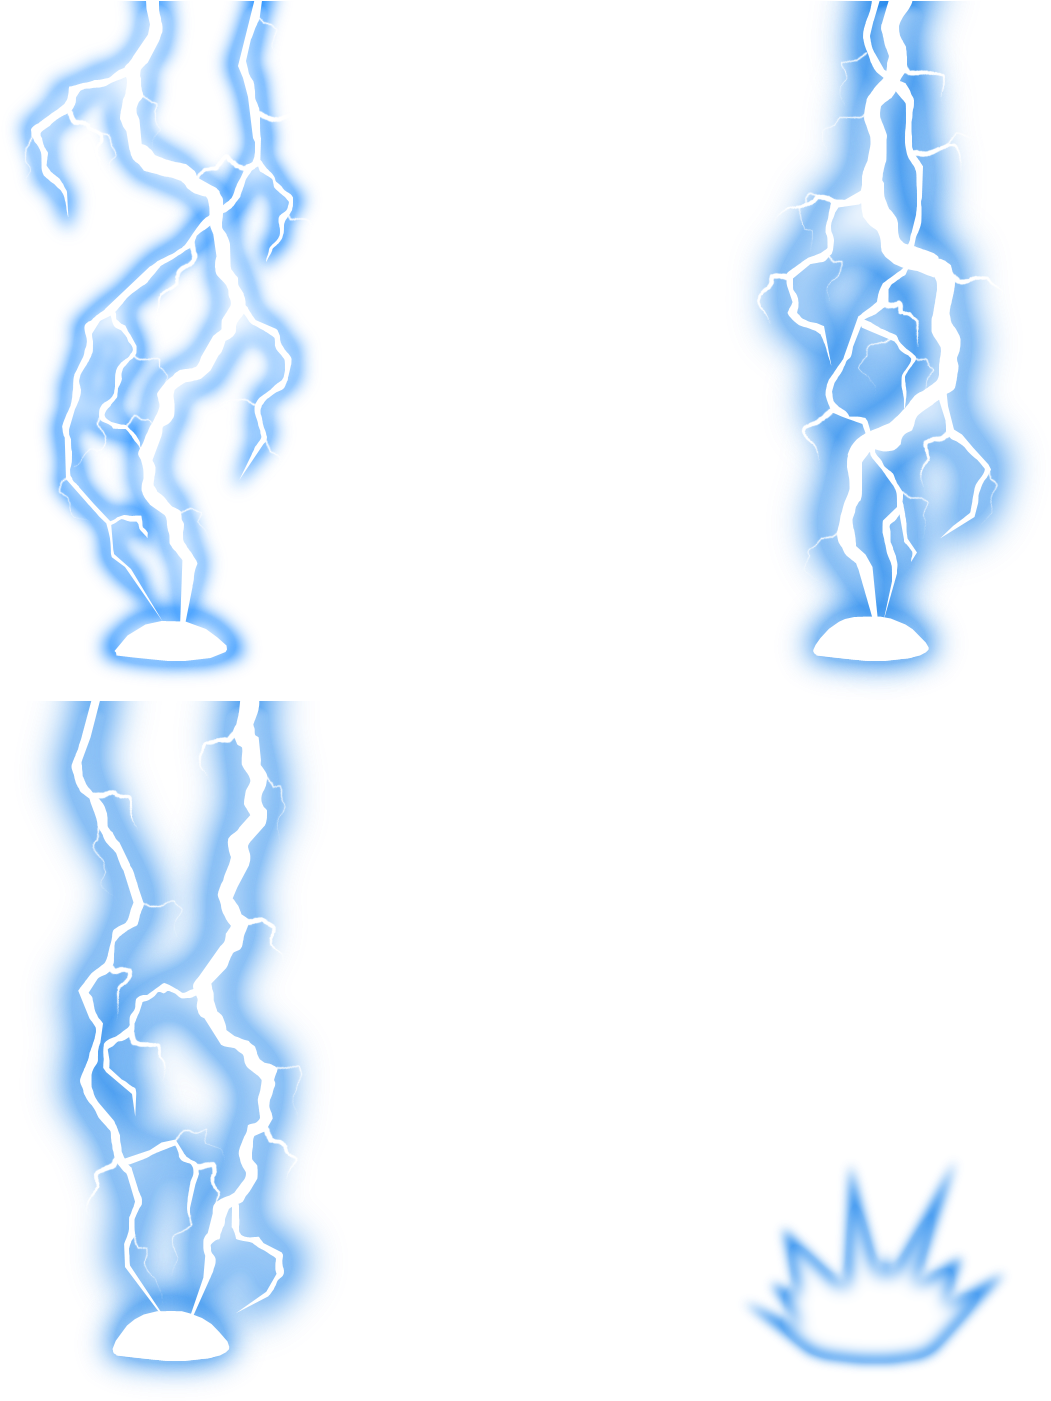 Blue Lightning Effects Graphic